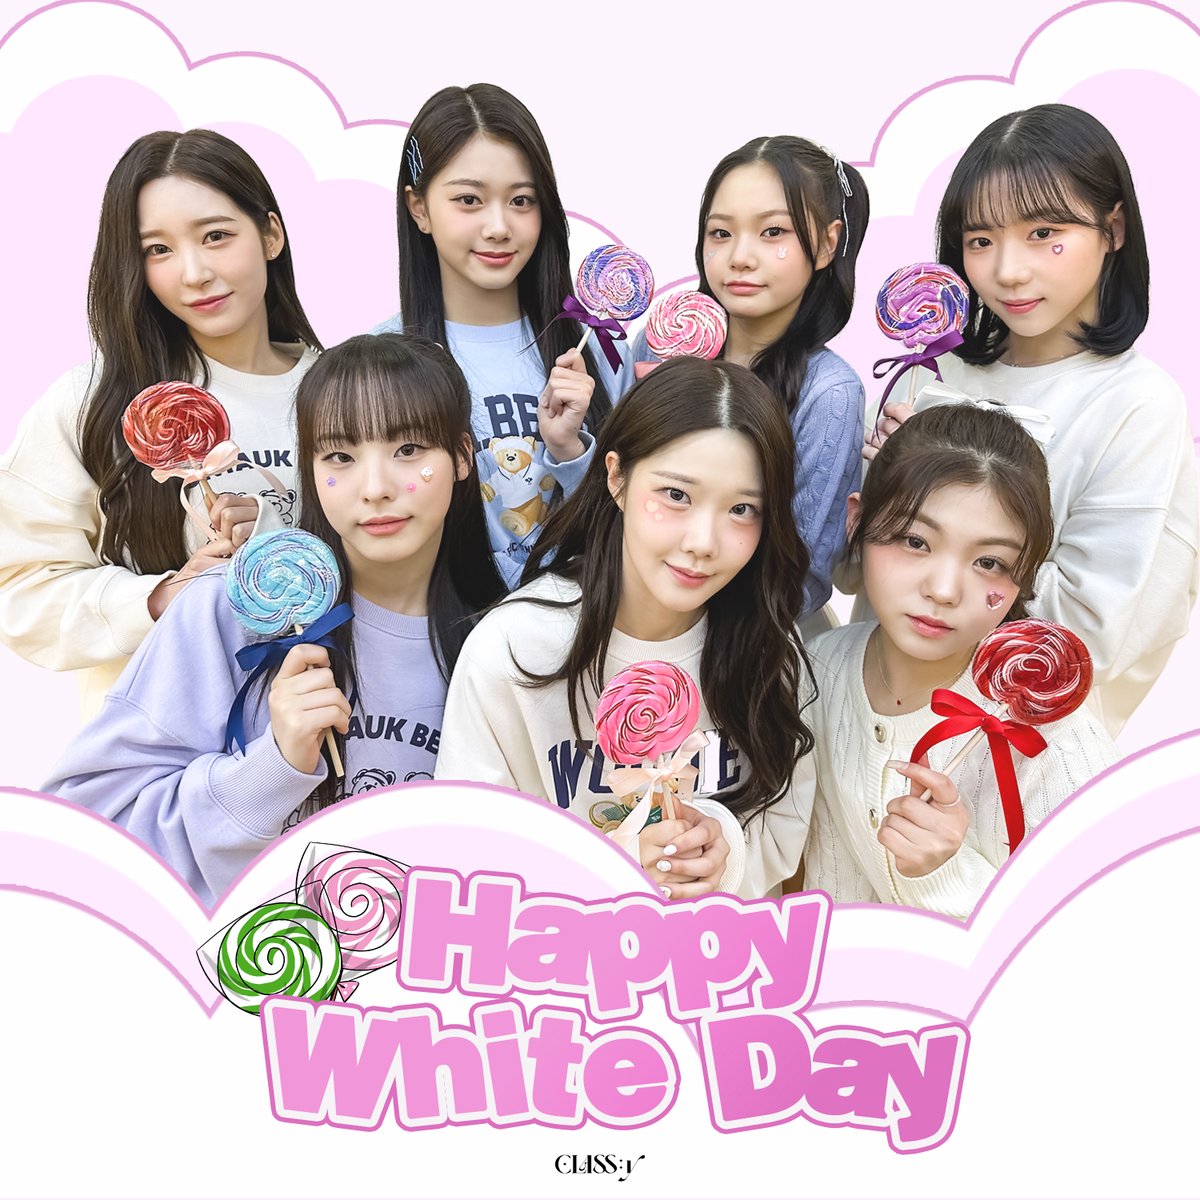 CLASS:y, 'Kissing You' choreography cover released... A surprise gift for White Day